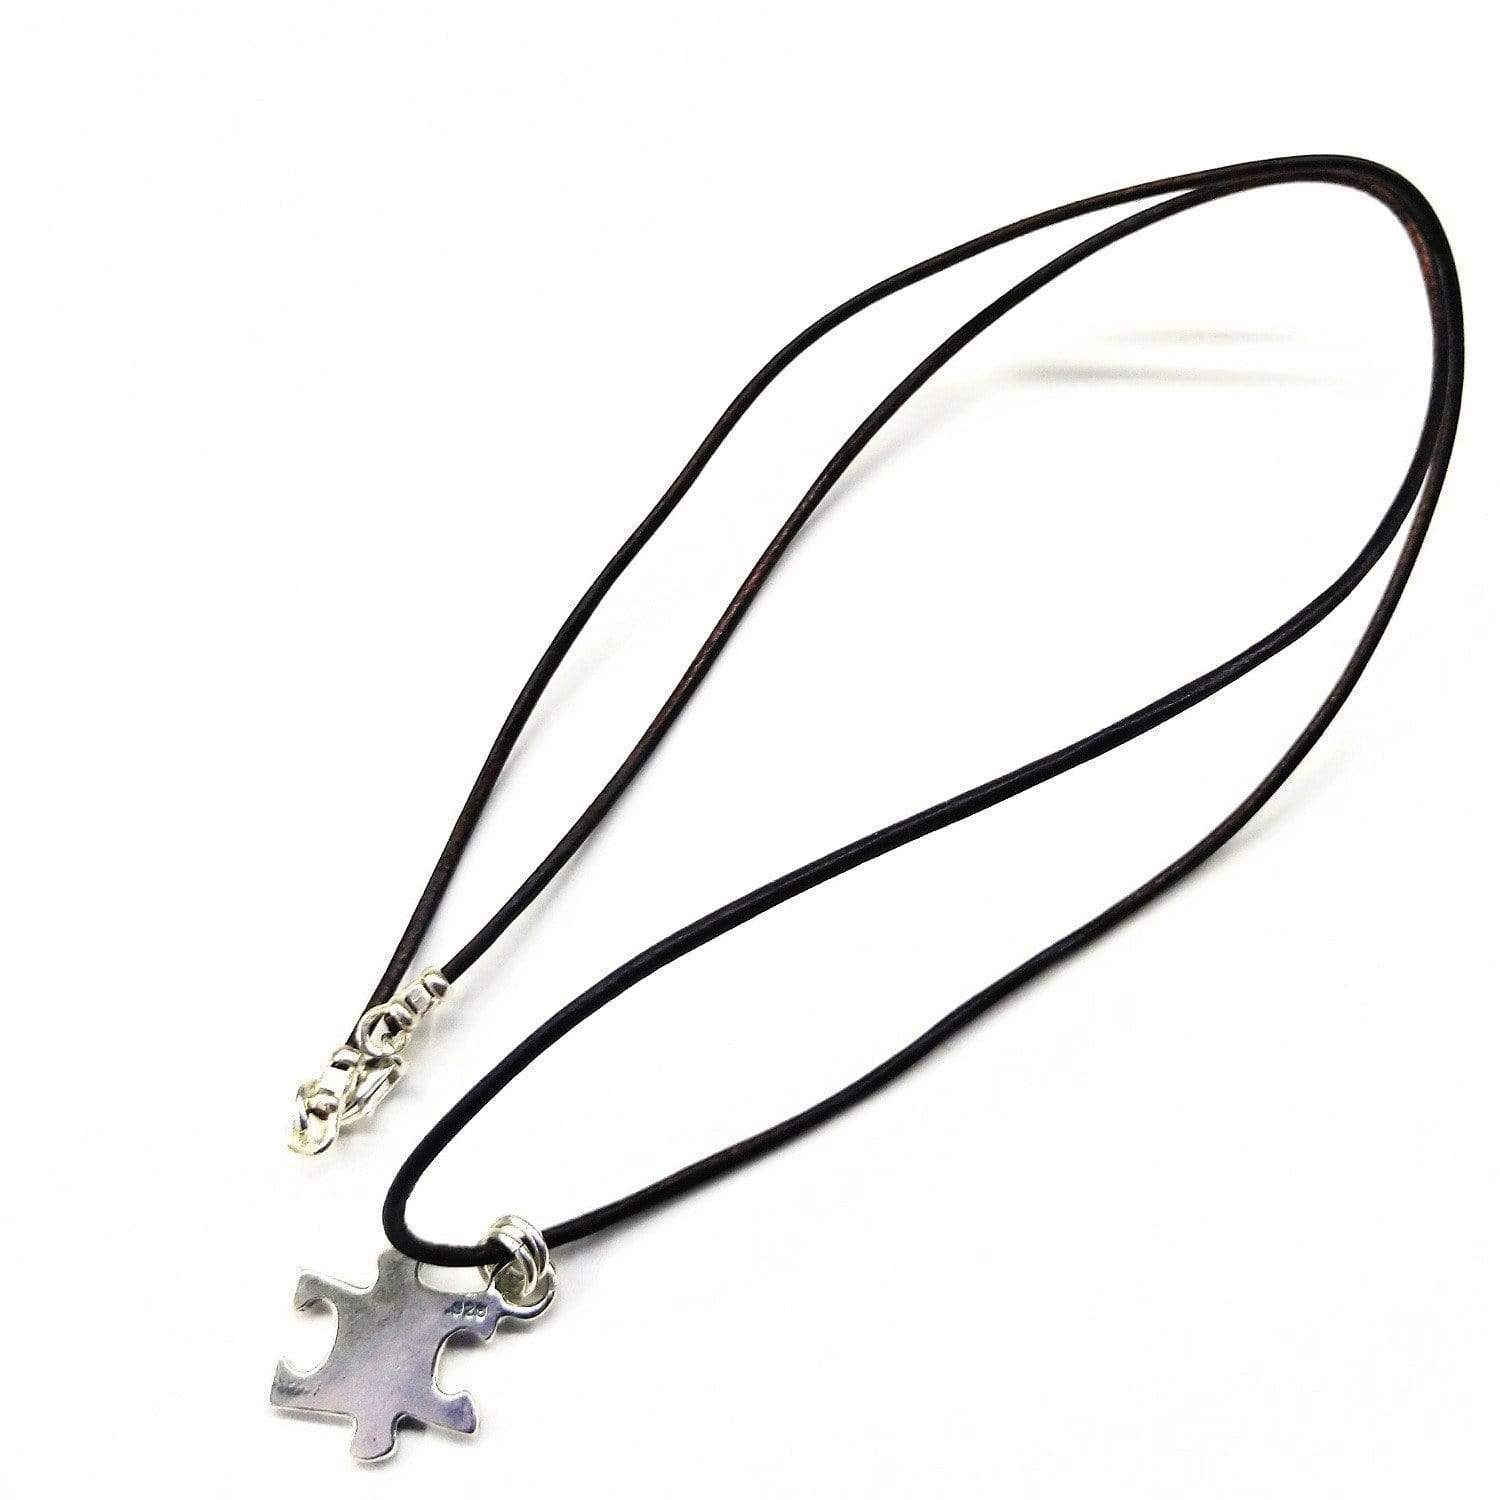 Sparkly Sterling Silver Autism Puzzle Piece Leather Necklace - 18" with Extension Chain
Keywords: Autism Awareness, Sterling Silver, Puzzle Piece, Leather Necklace, Handcrafted, Extension Chain - Necklaces - Bijou Her -  -  - 